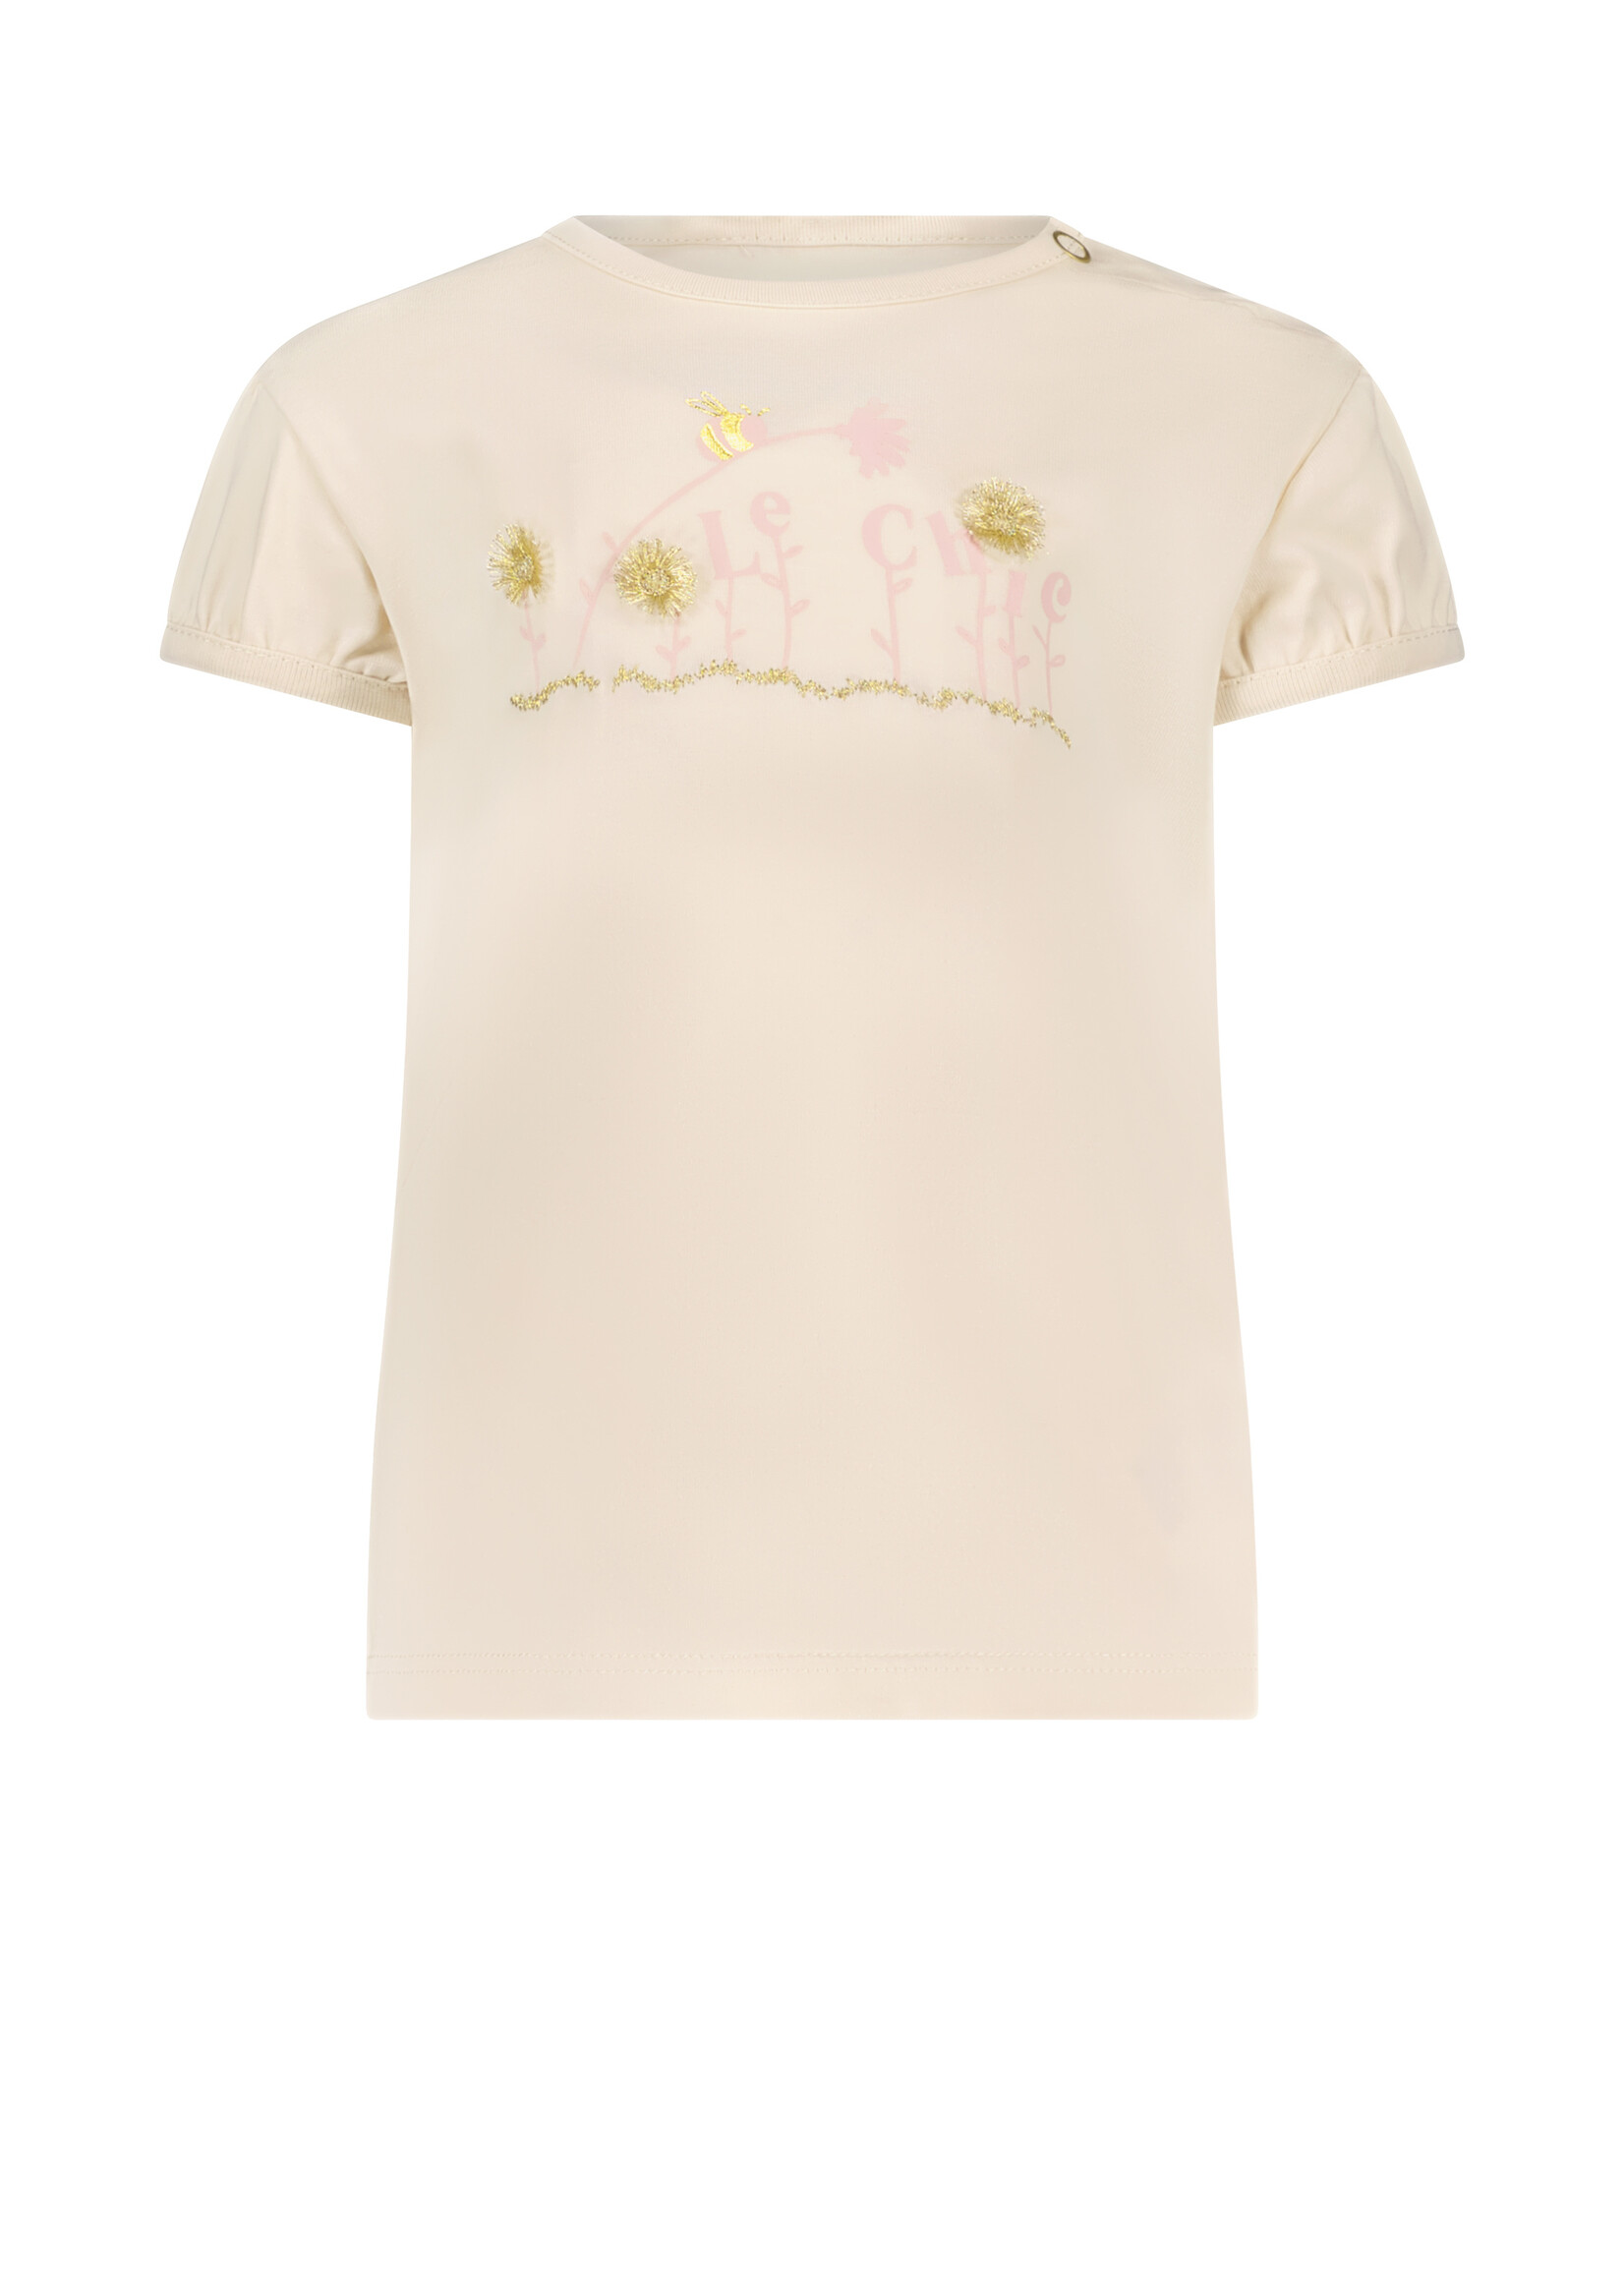 Le Chic Girls Baby C312-7406 NOKI flowers for bees T-shirt Pearled Ivory